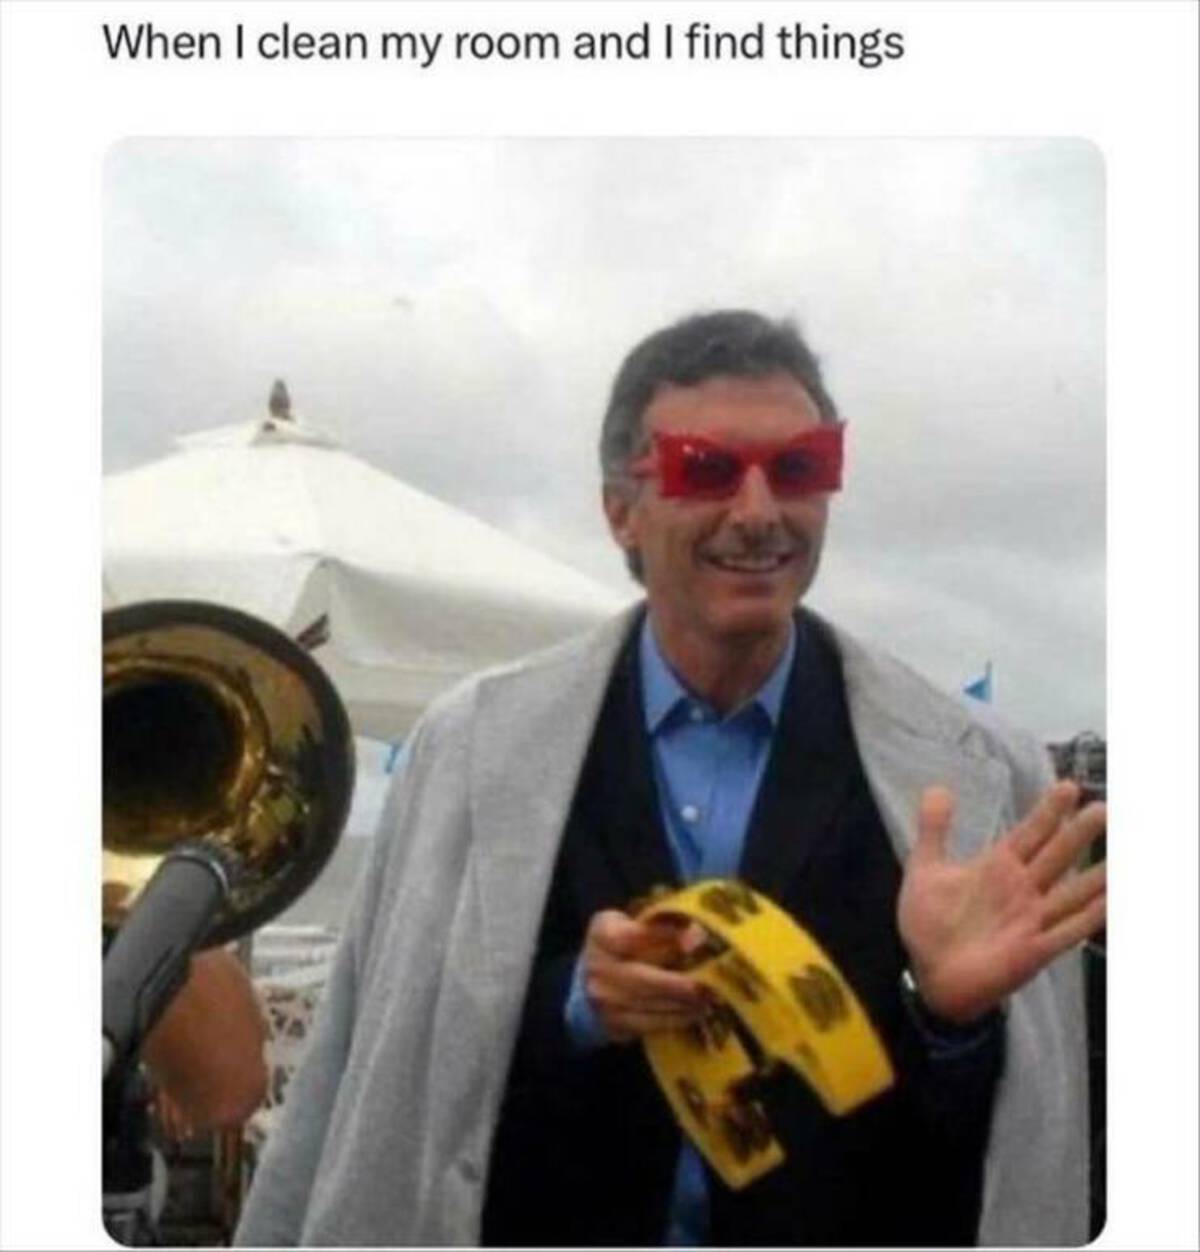 photo caption - When I clean my room and I find things